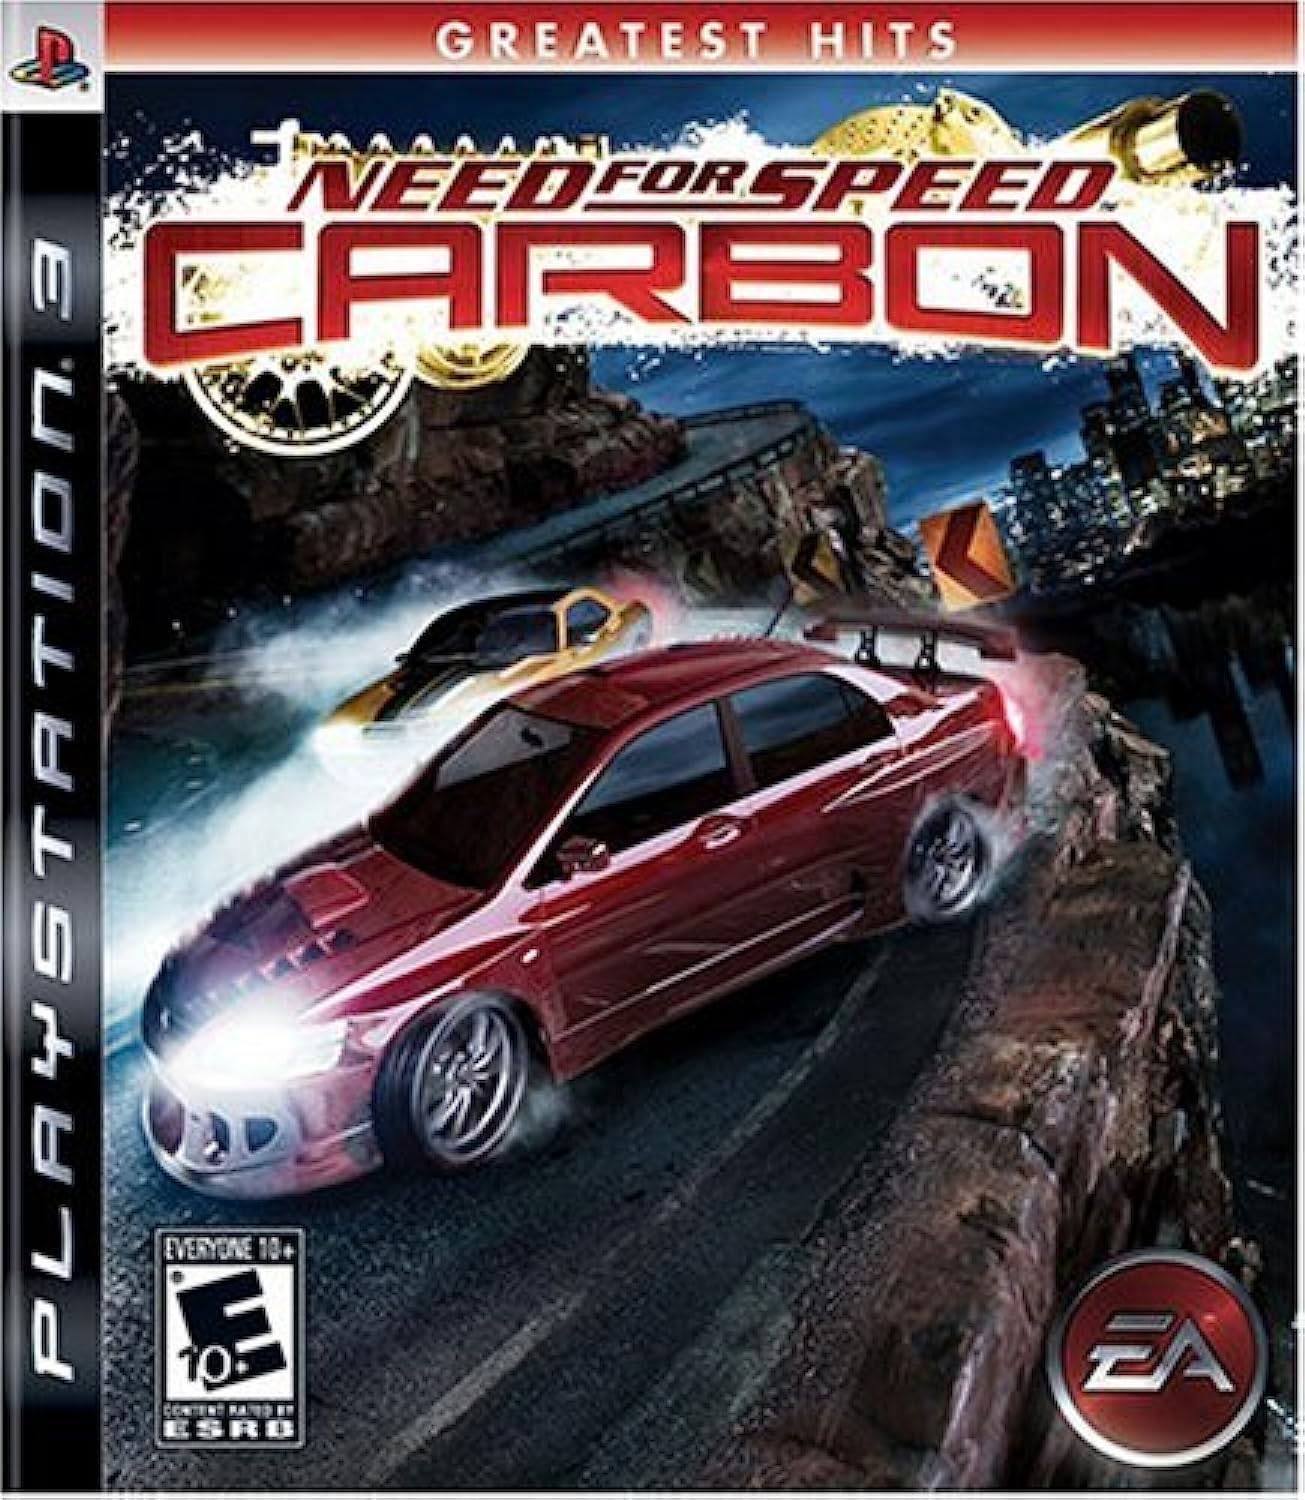 NEED FOR SPEED - PS3 SONY